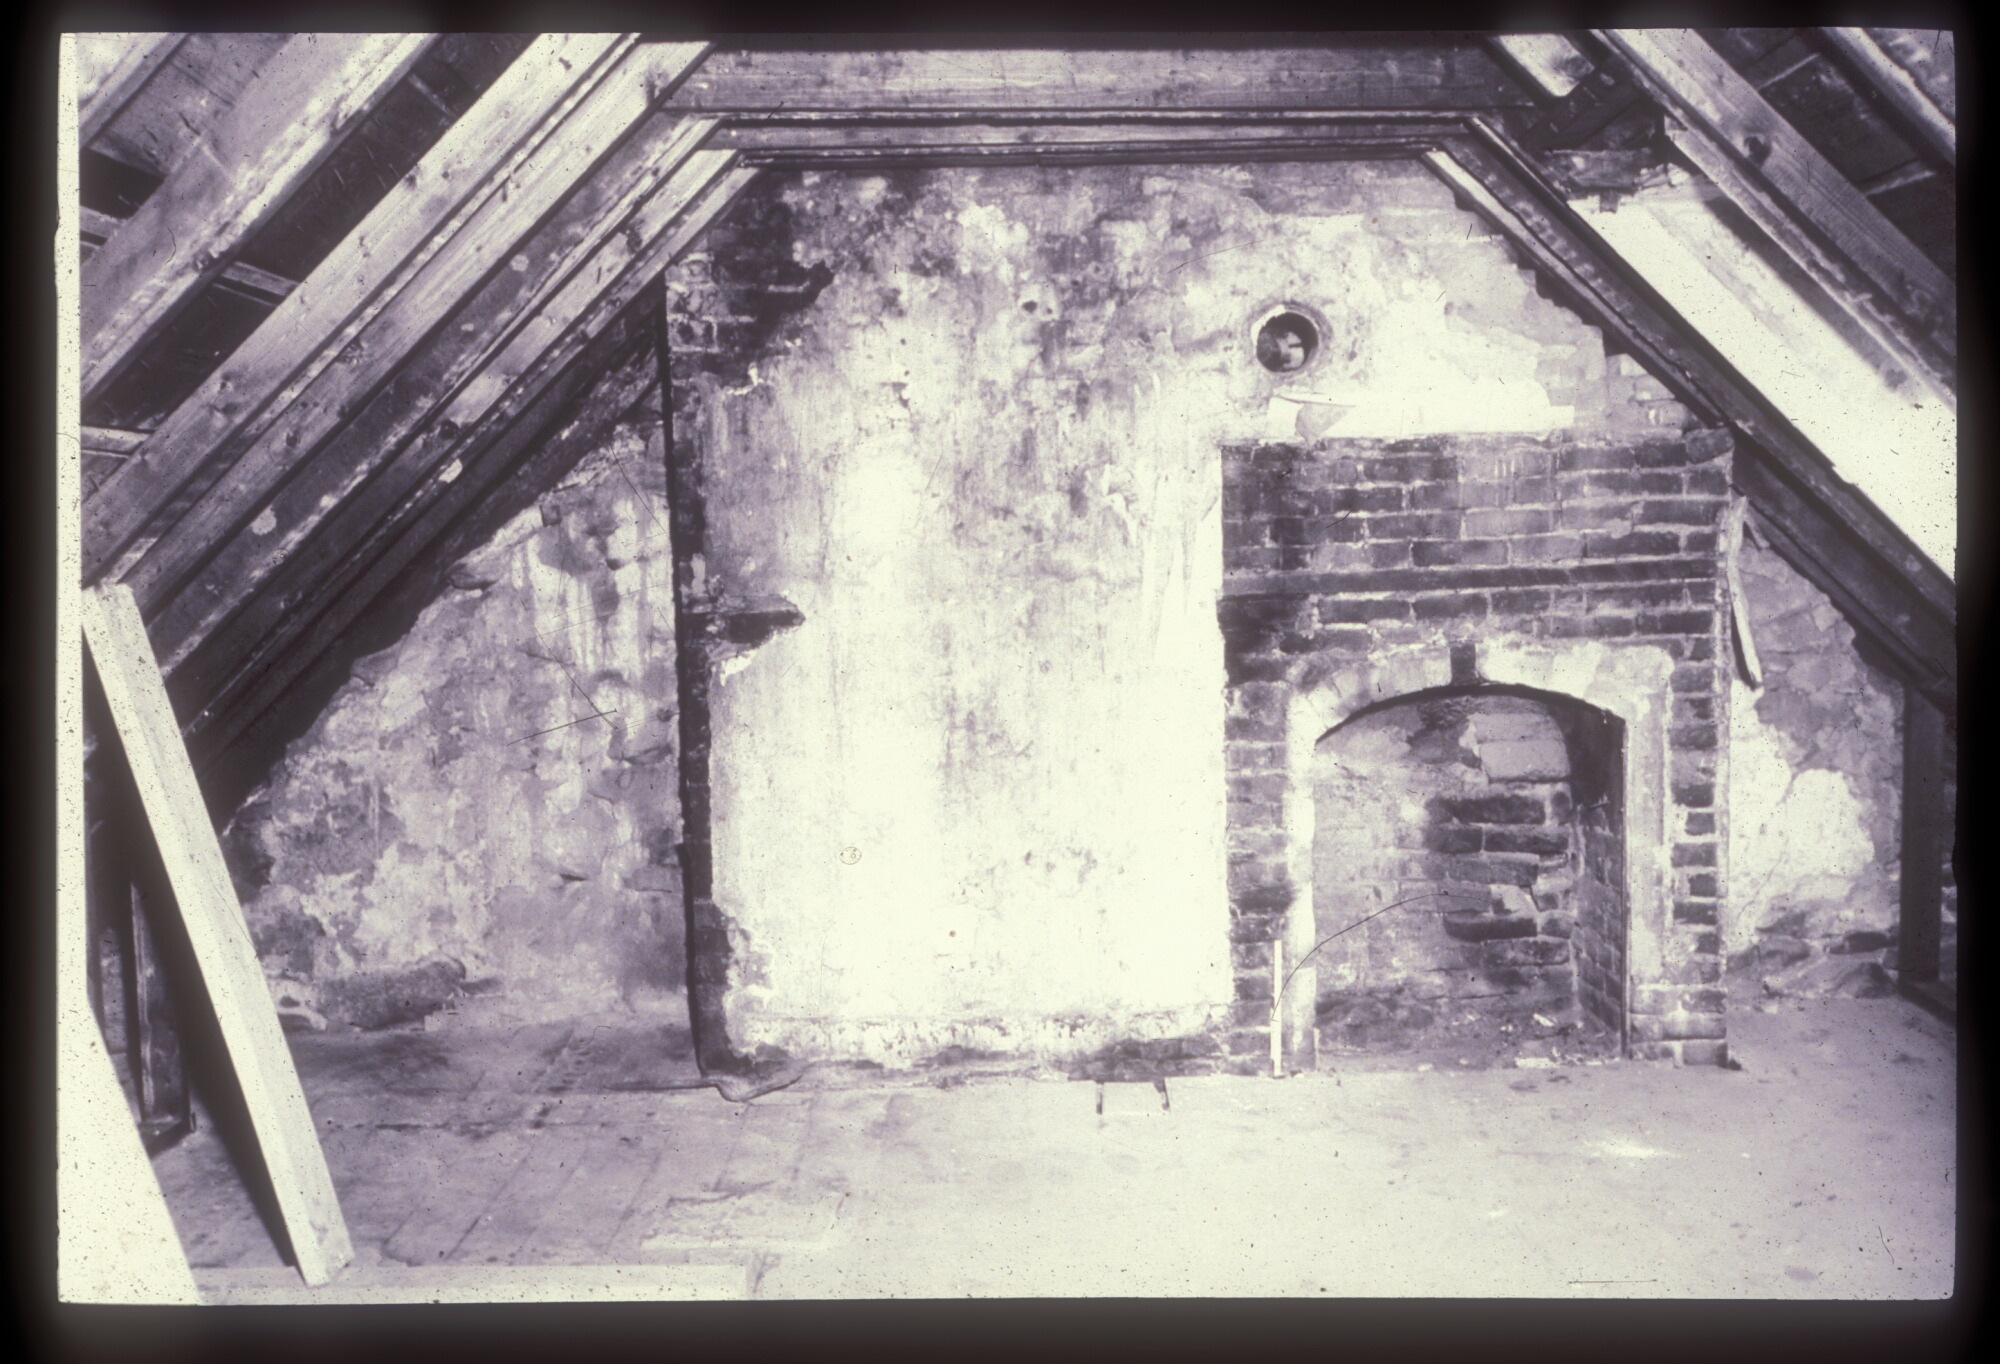 A small brick fireplace in a wall with a sharply angled ceiling